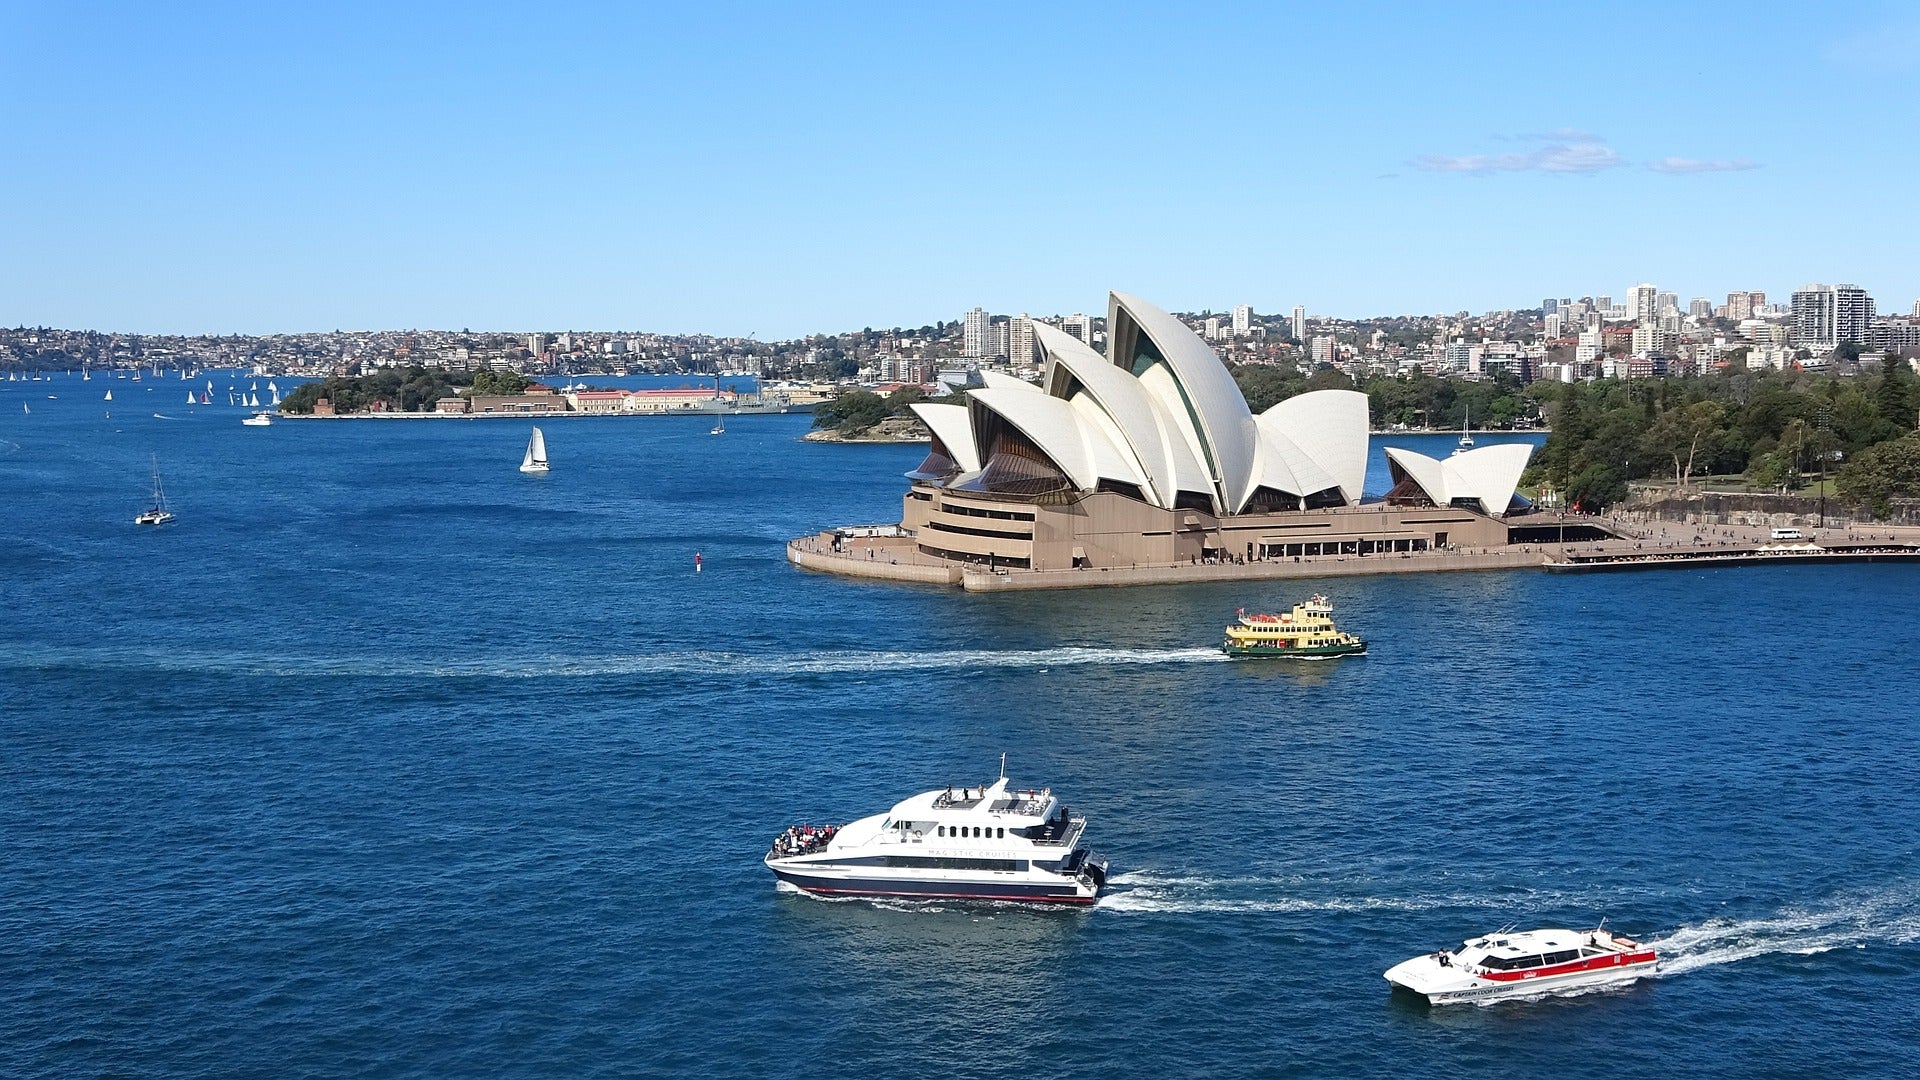 the view on sydney with water and boats aswell as a sight as travel target for esim